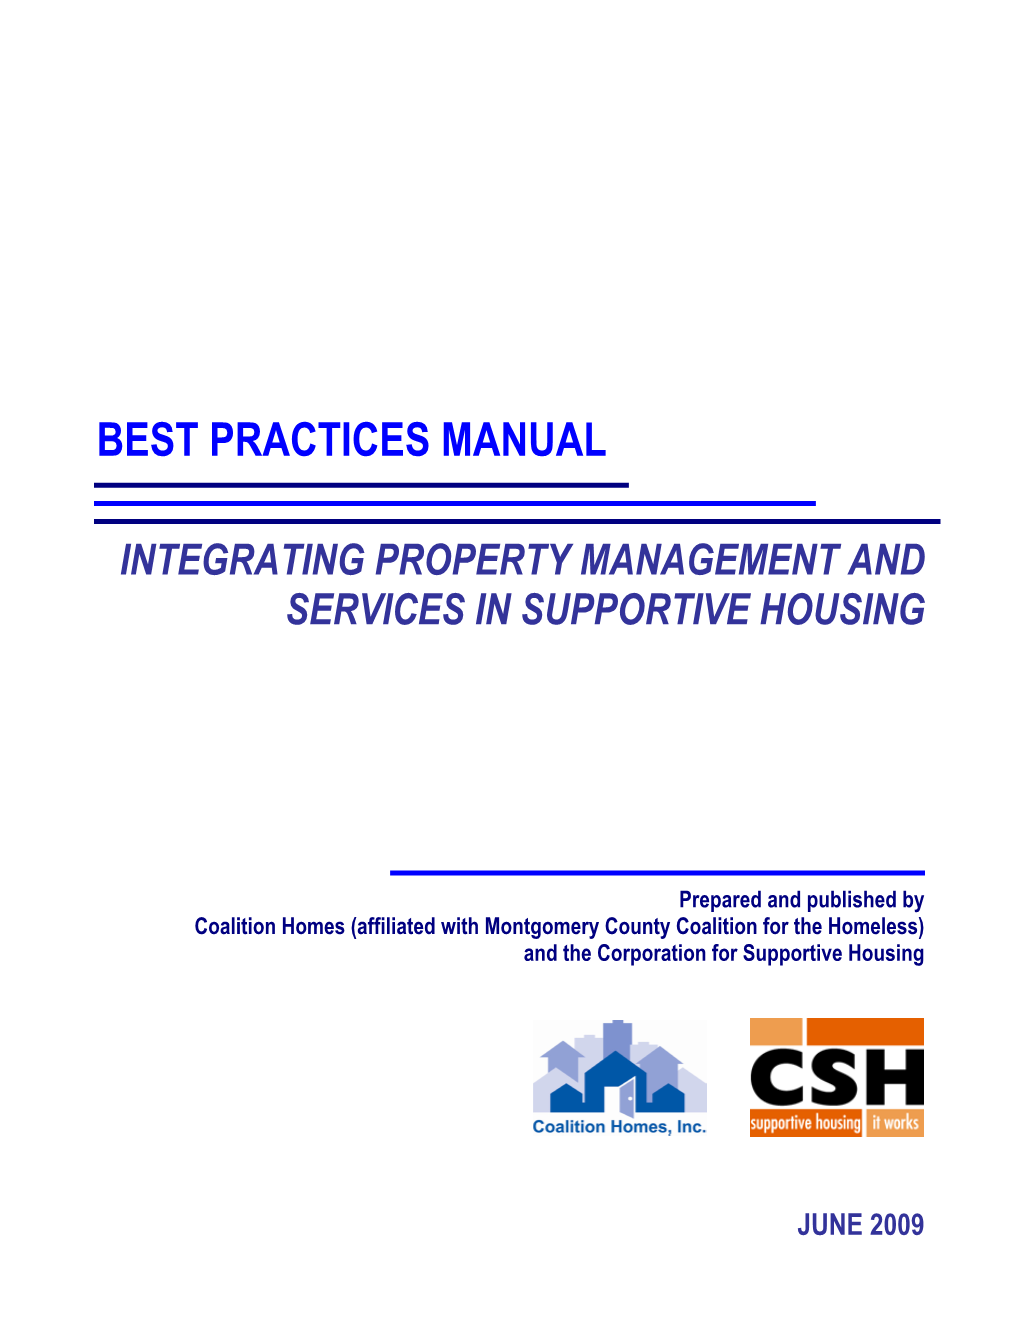 Property Management and Services in Supportive Housing